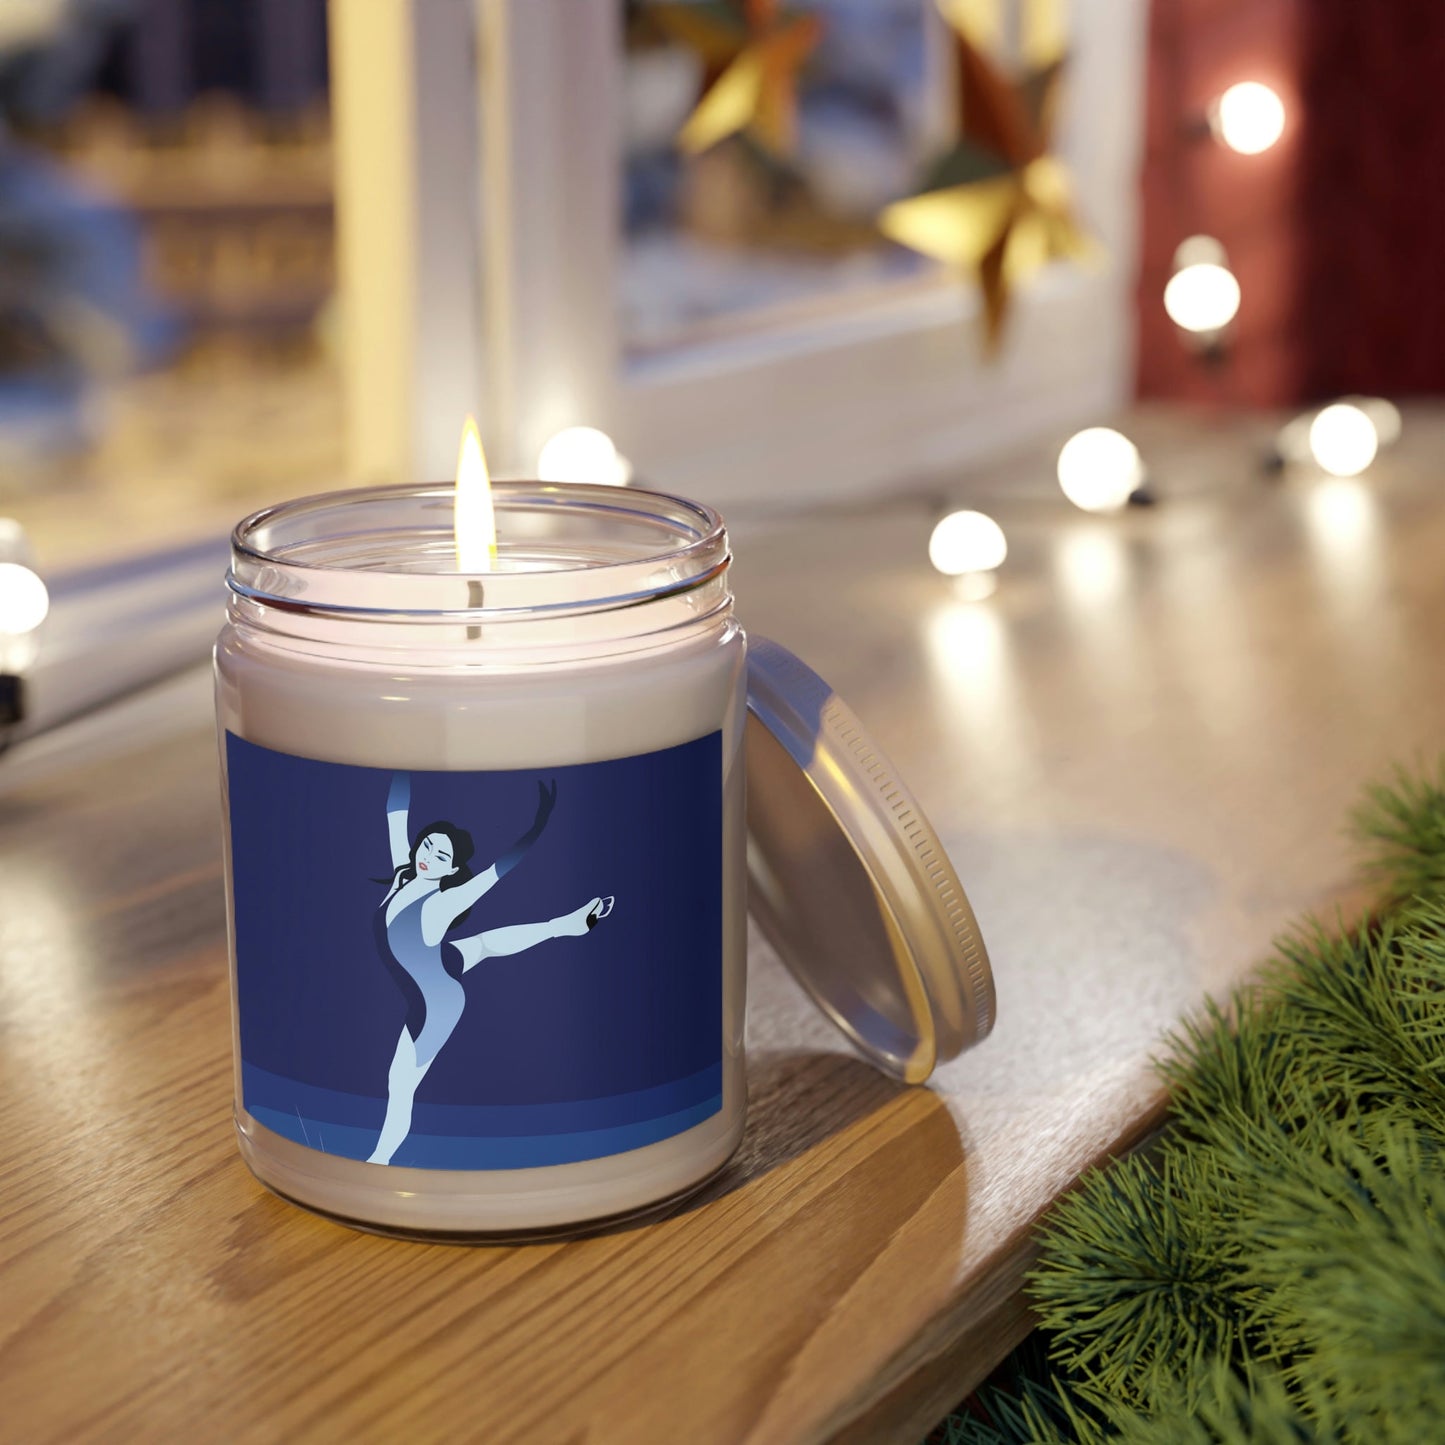 Woman Figure Skating Performance Minimal Sport Lovers Aesthetic Art Scented Candle Up to 60hSoy Wax 9oz Ichaku [Perfect Gifts Selection]